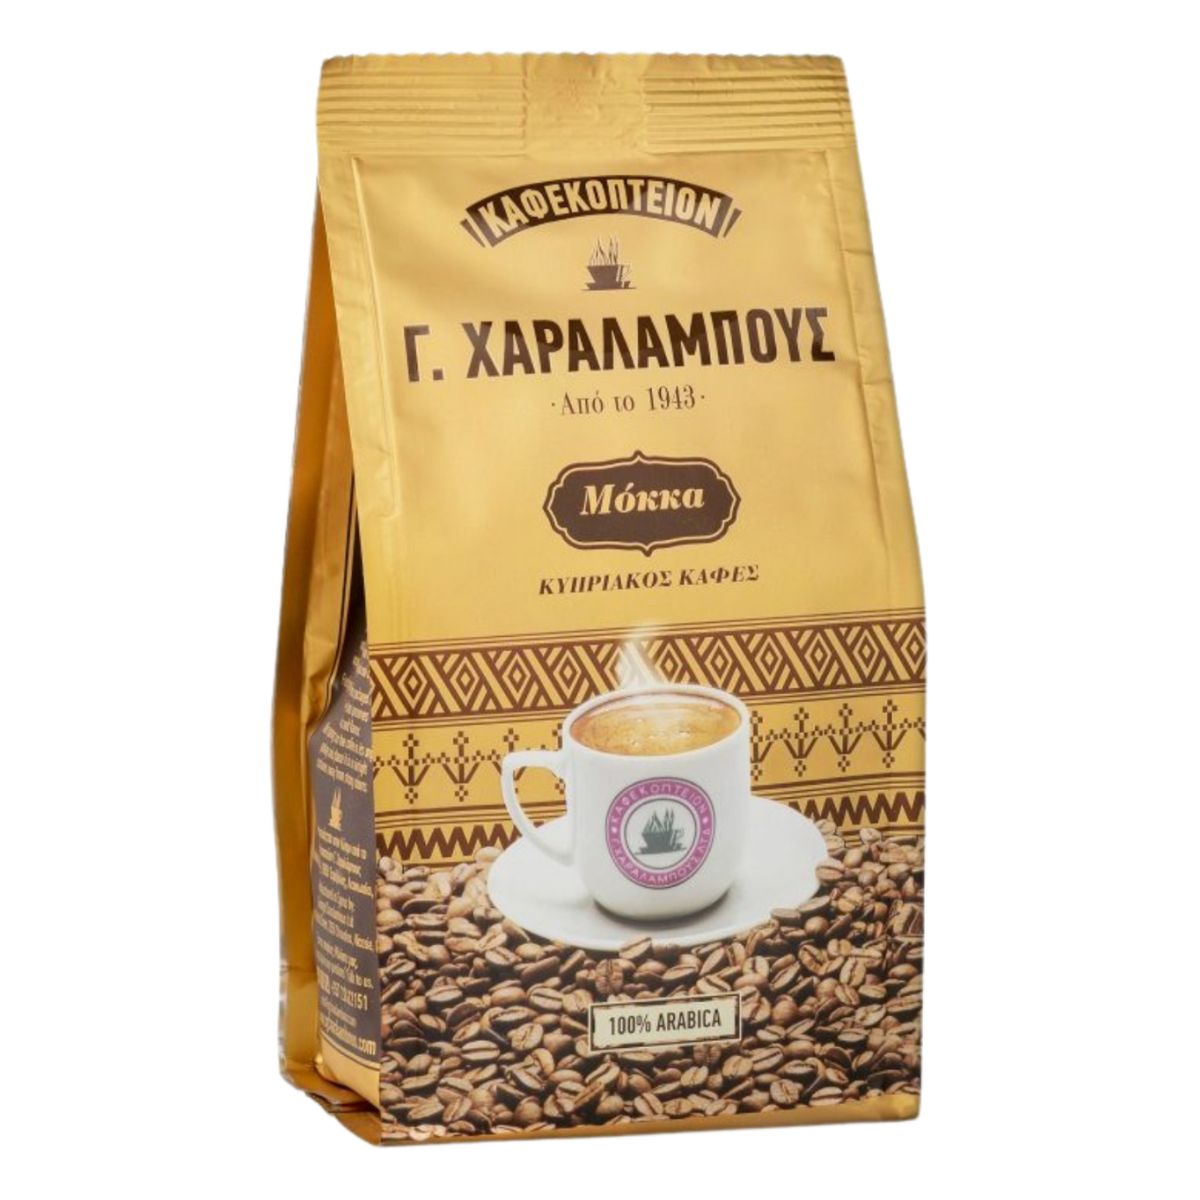 A bag of Charalambous - Gold Mocca Blend Cyprus Traditional Ground Coffee - 200g with a label on it.